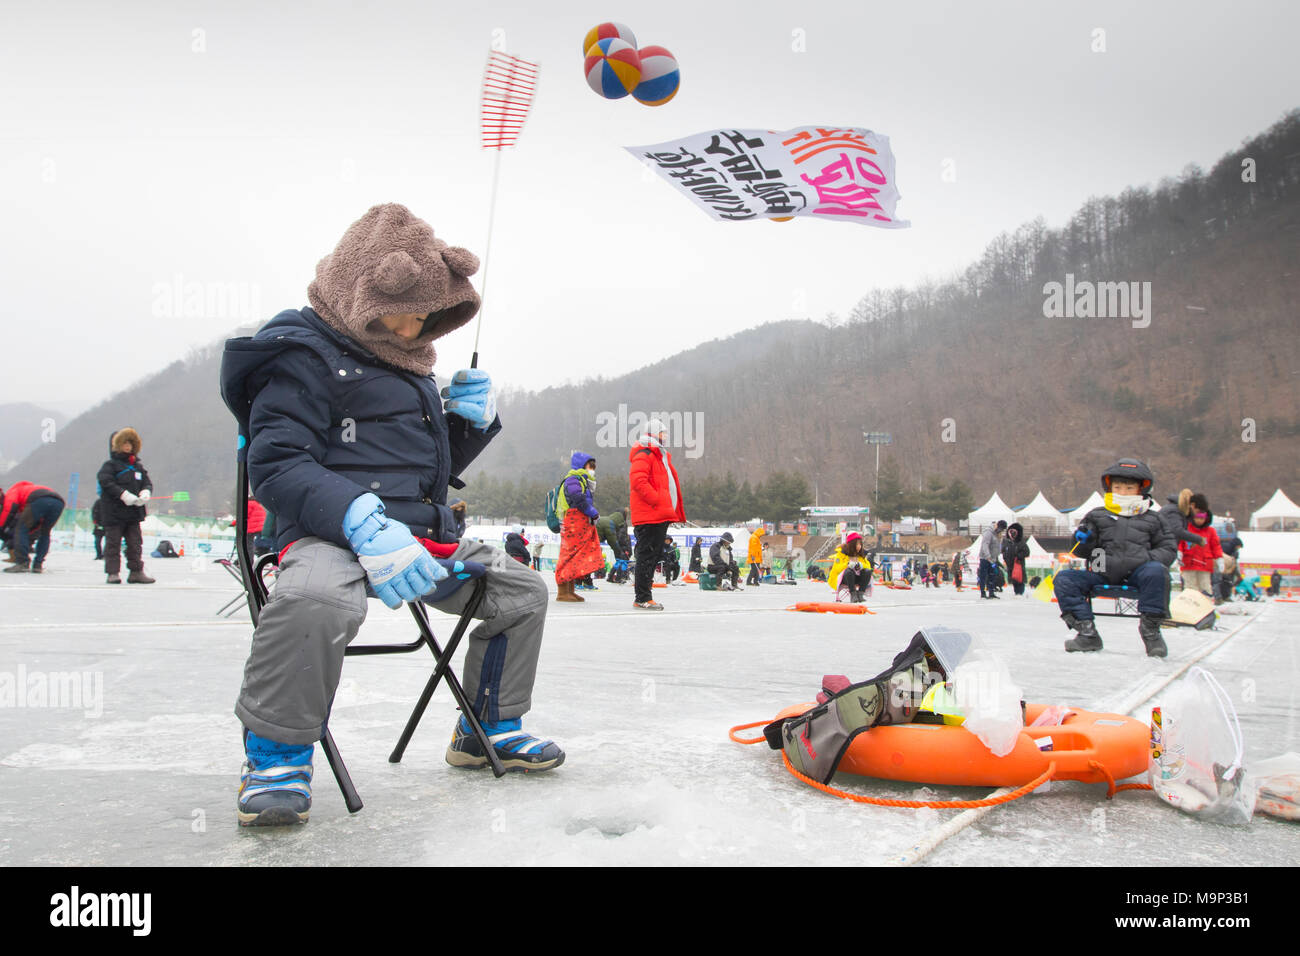 A young boy is waiting over a hole in the ice during the ice fishing festival at Hwacheon Sancheoneo in the Gangwon-do region of South Korea.  The Hwacheon Sancheoneo Ice Festival is a tradition for Korean people. Every year in January crowds gather at the frozen river to celebrate the cold and snow of winter. Main attraction is ice fishing. Young and old wait patiently over a small hole in the ice for a trout to bite. In tents they can let the fish grilled after which they are eaten. Among other activities are sledding and ice skating.  The nearby Pyeongchang region will host the Winter Stock Photo